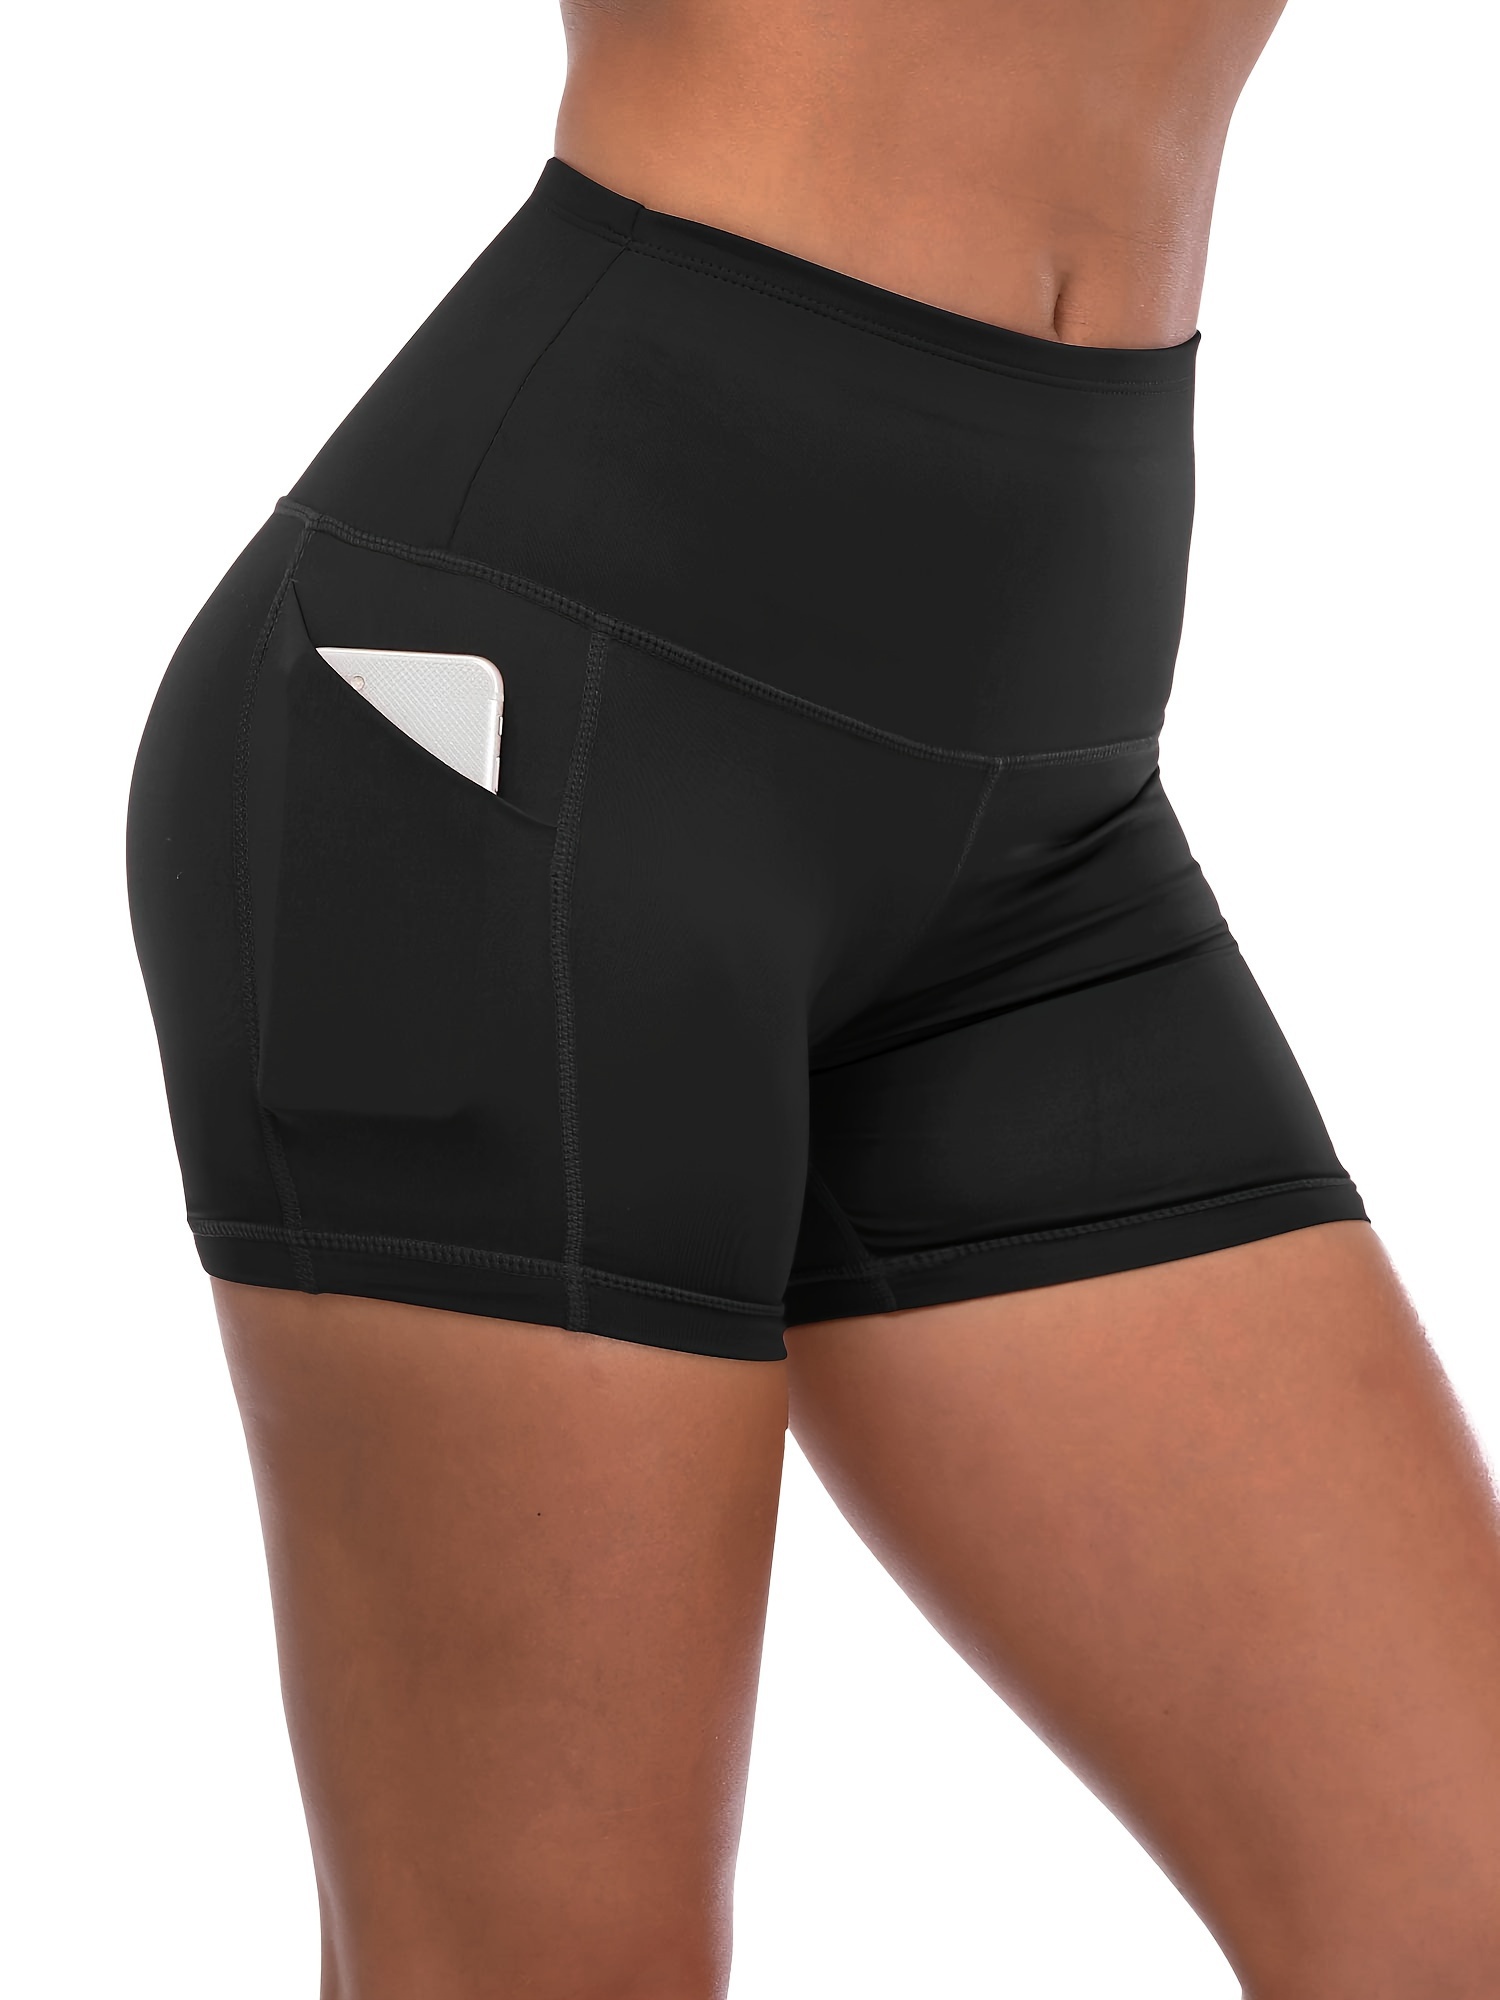 Women High Waist Yoga Shorts With Side Pockets Workout Running Compression  Athletic Biker Shorts Slim Knee-Length Bottoms Yogaes - AliExpress